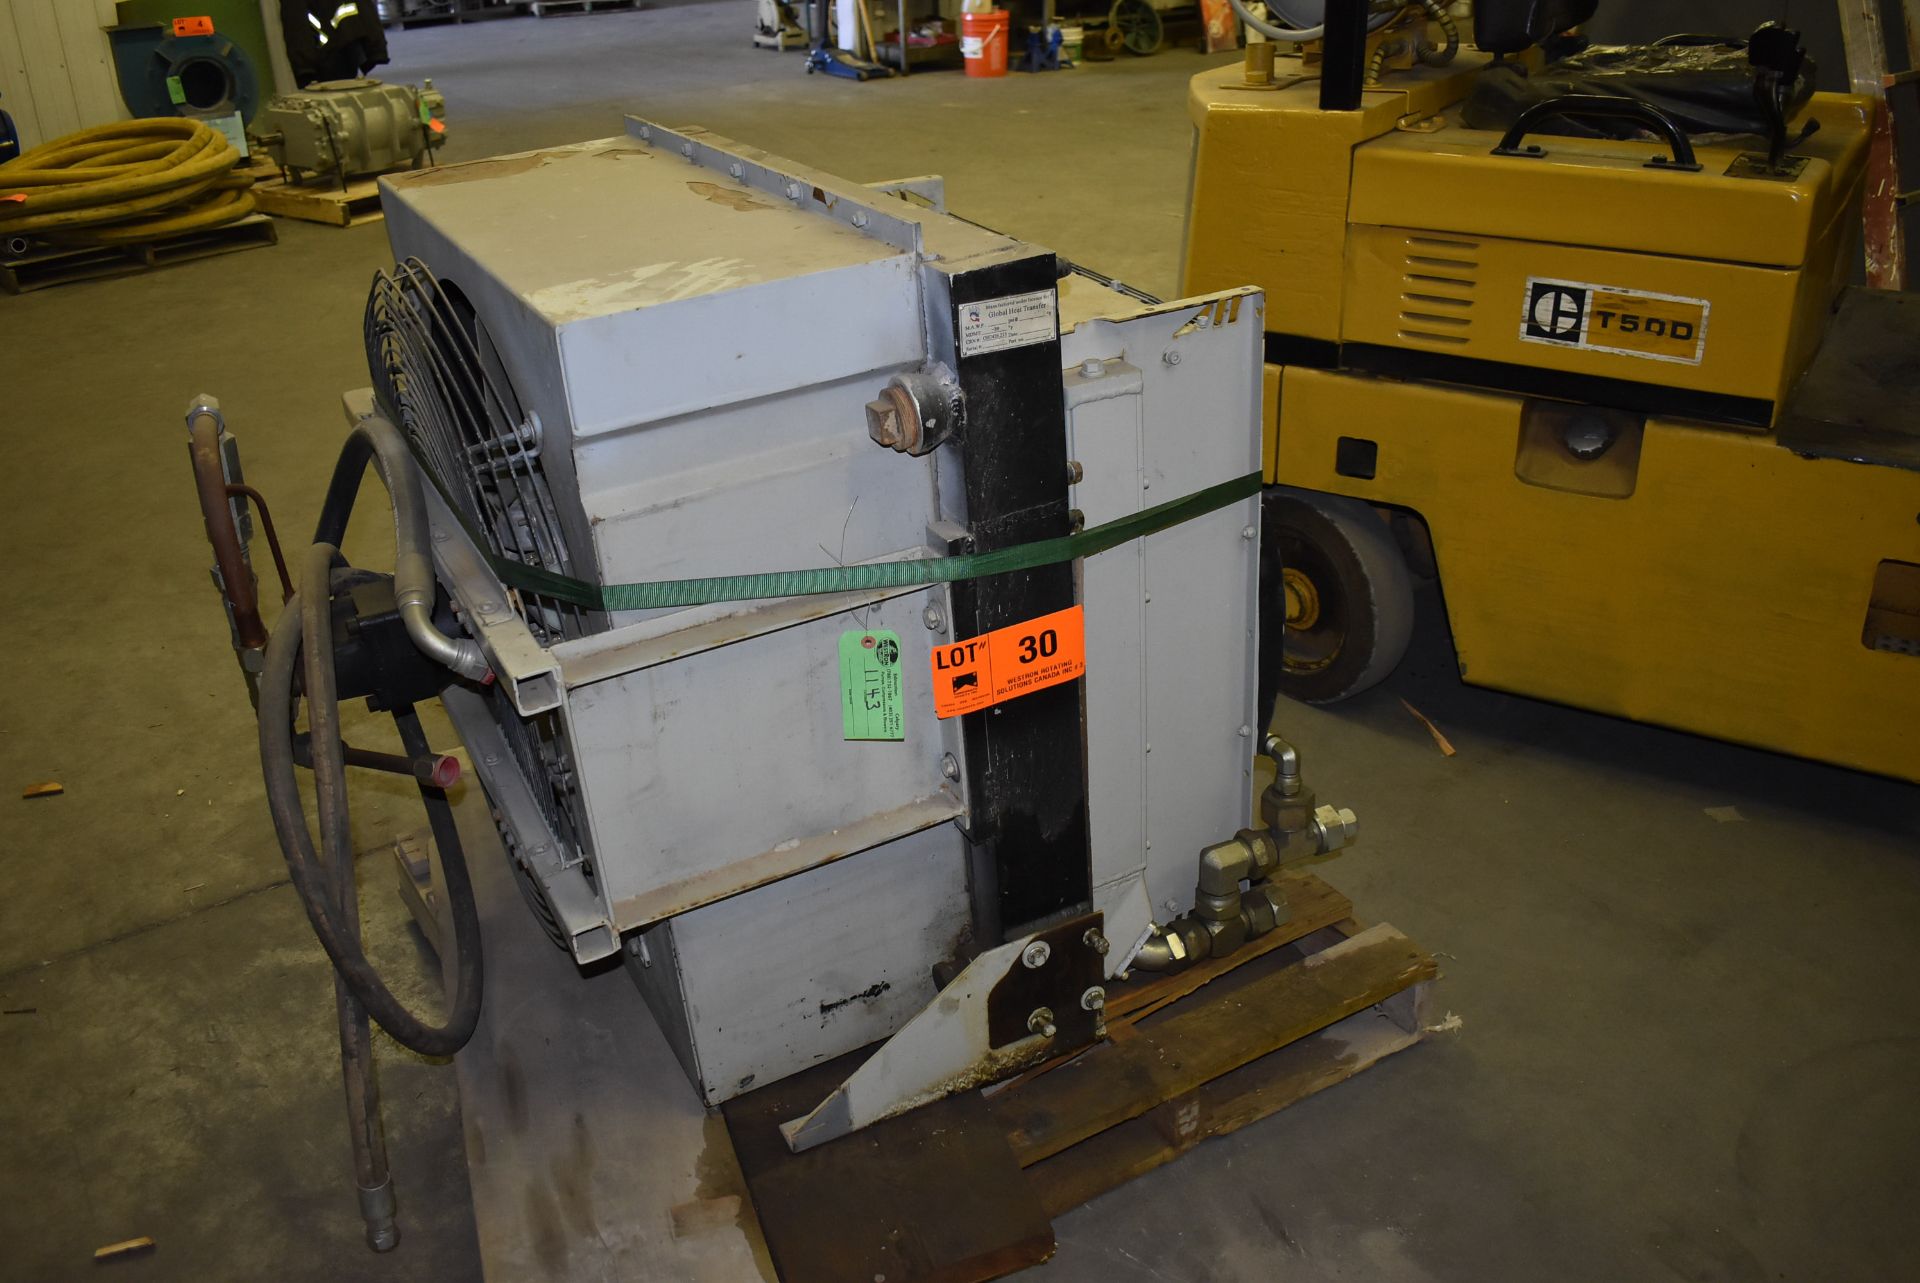 GLOBAL HEAT TRANSFER AIR-COOLED COOLER UNIT, S/N: N/A (CI) [SKU 1143] [RIGGING FEE FOR LOT #30 - $25 - Image 2 of 5